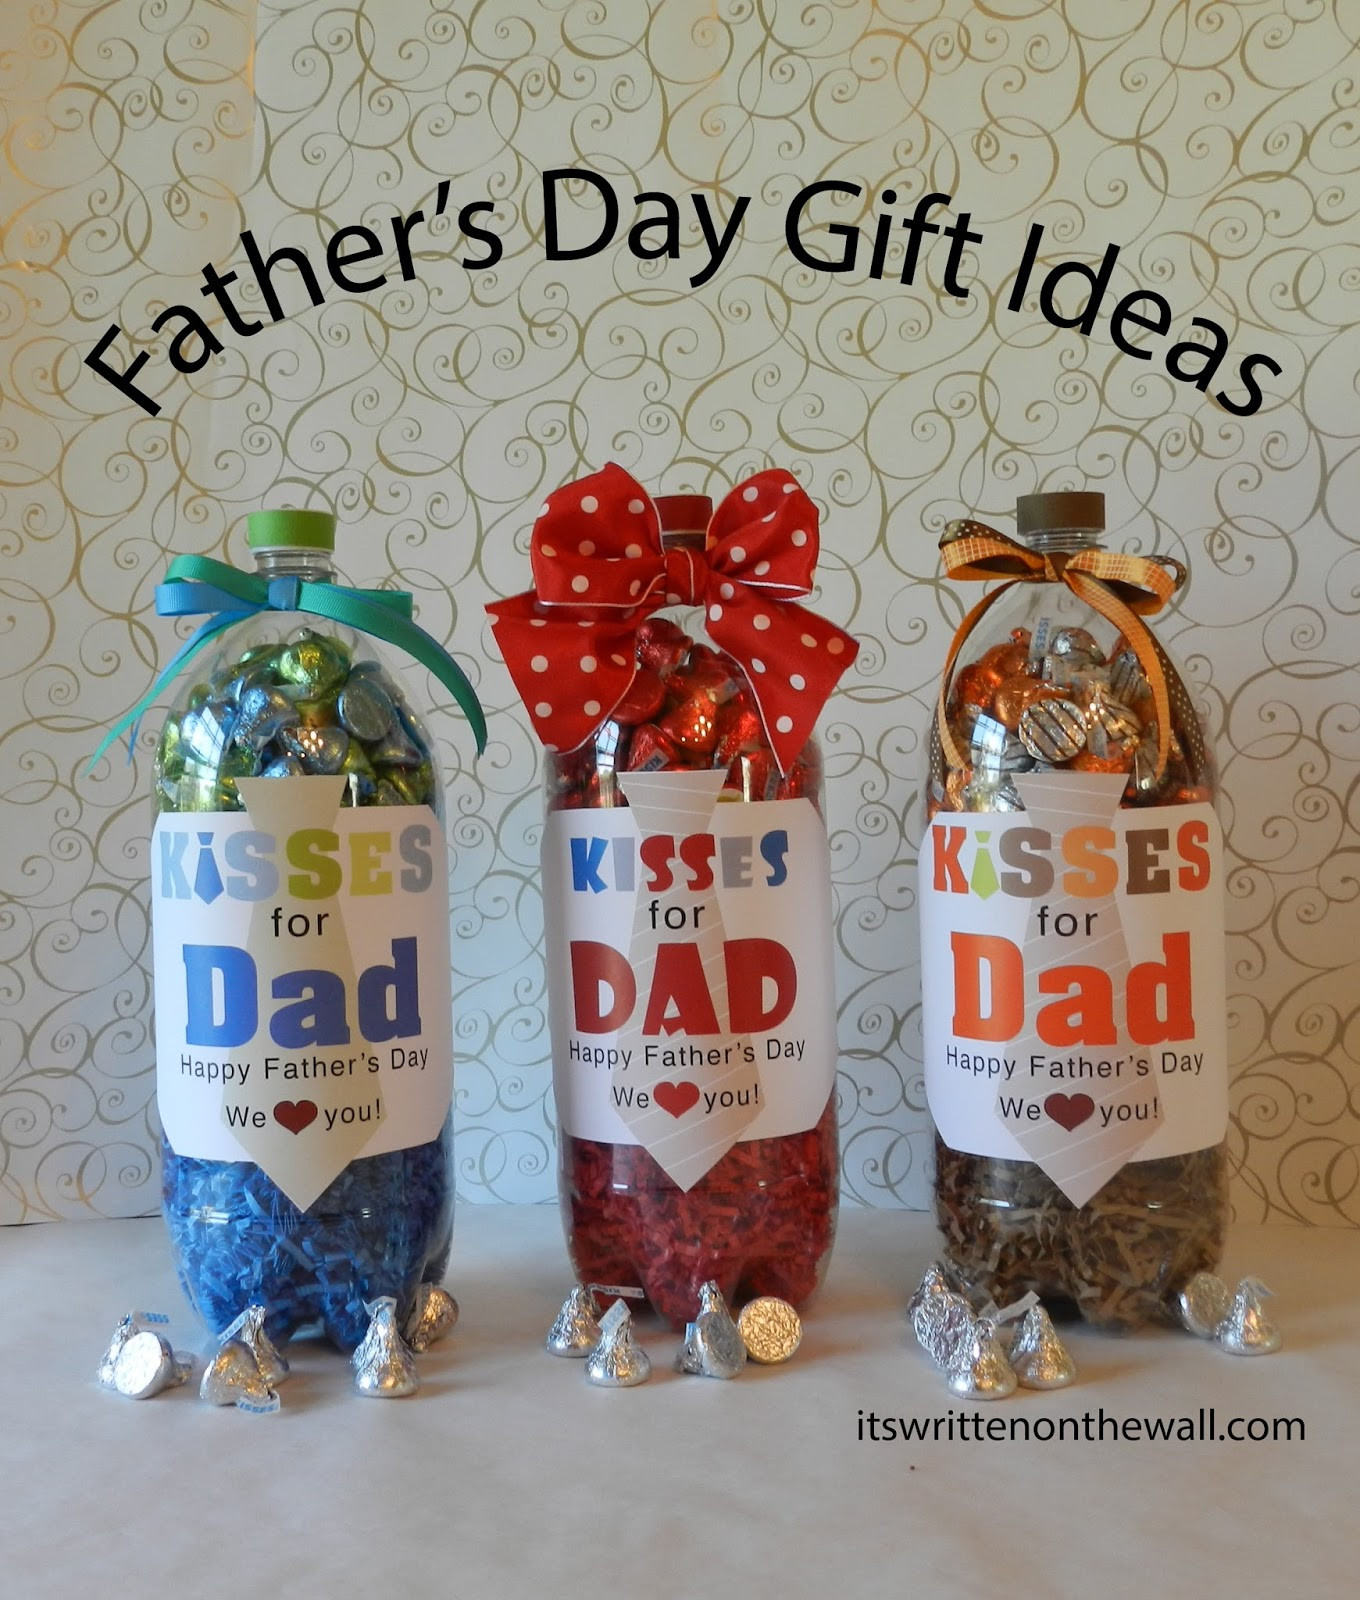 Gift Ideas For Fathers To Be
 It s Written on the Wall Fathers Day Gift Ideas For the